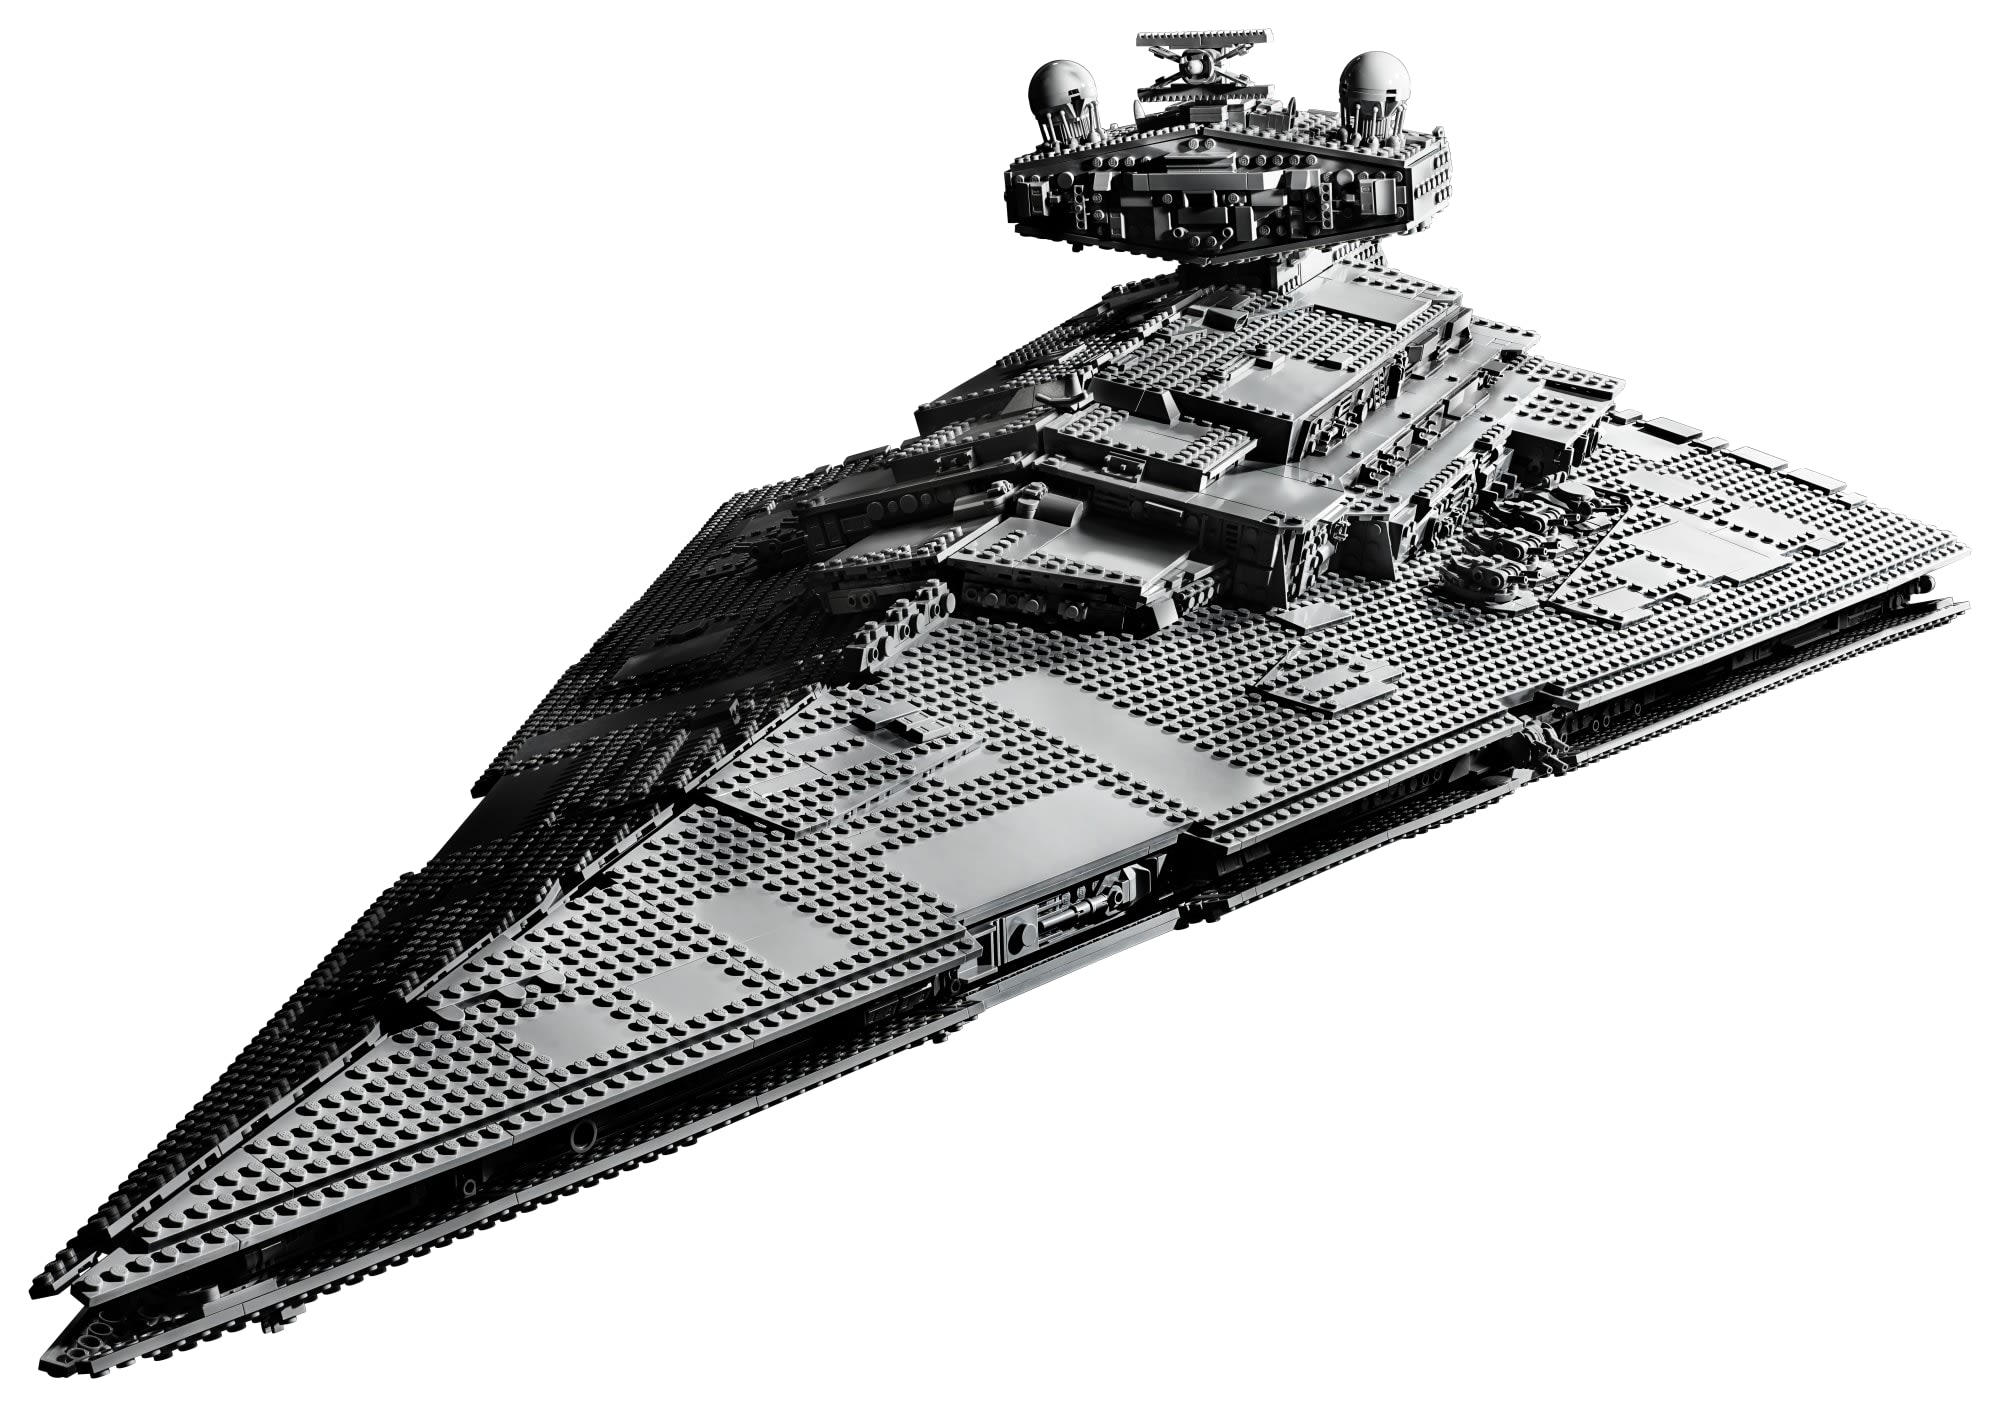 Lego S Imperial Star Destroyer Set Has 4 700 Pieces And Is